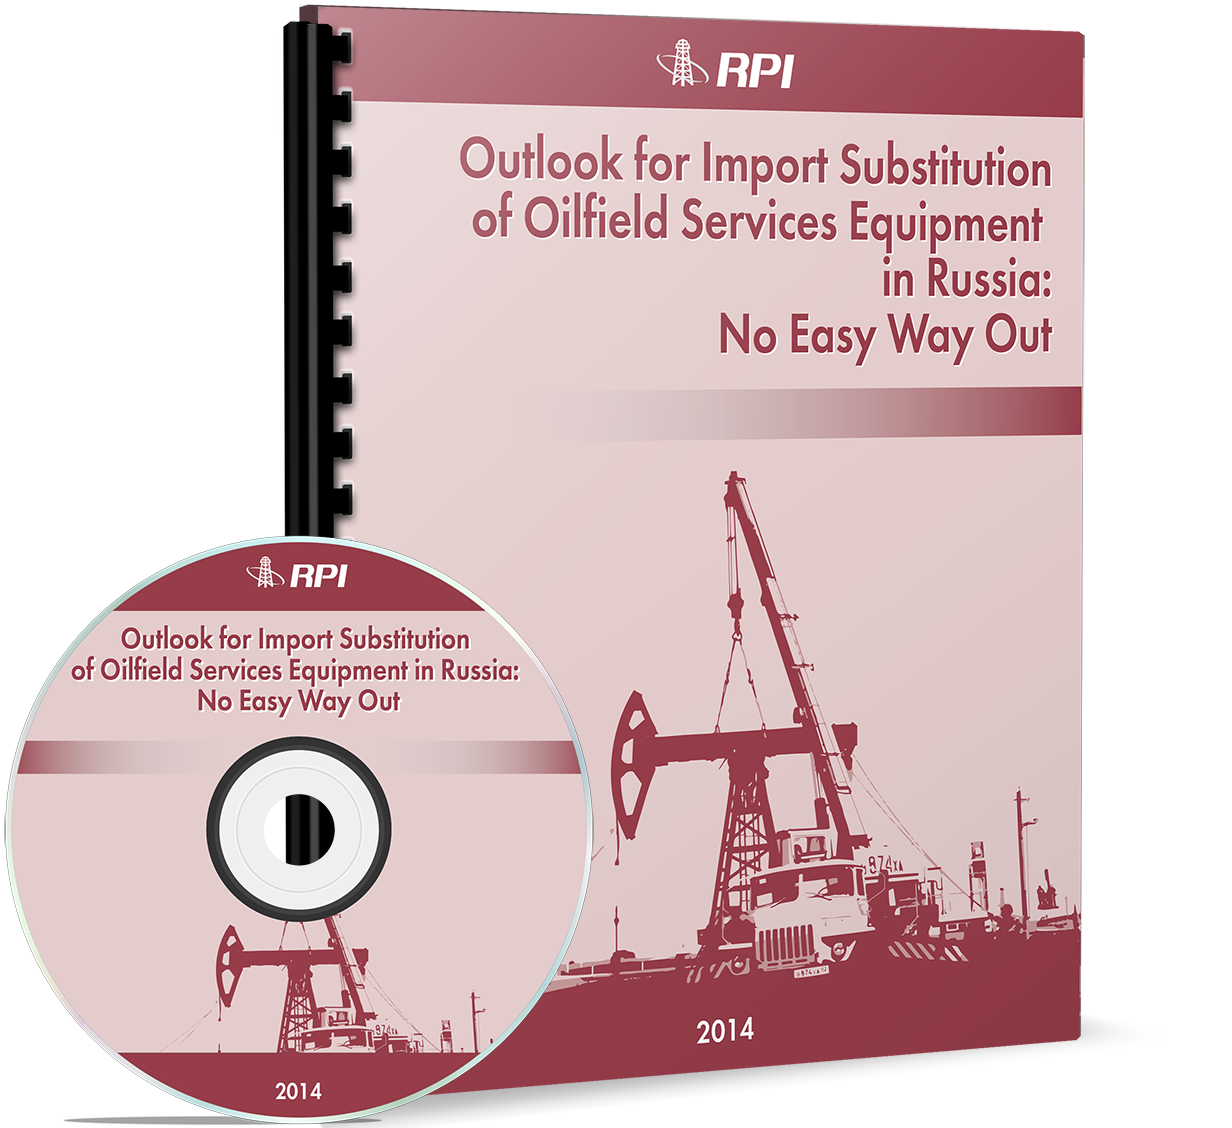 Outlook for Import Substitution of Oilfield Services Equipment in Russia: No Easy Way Out